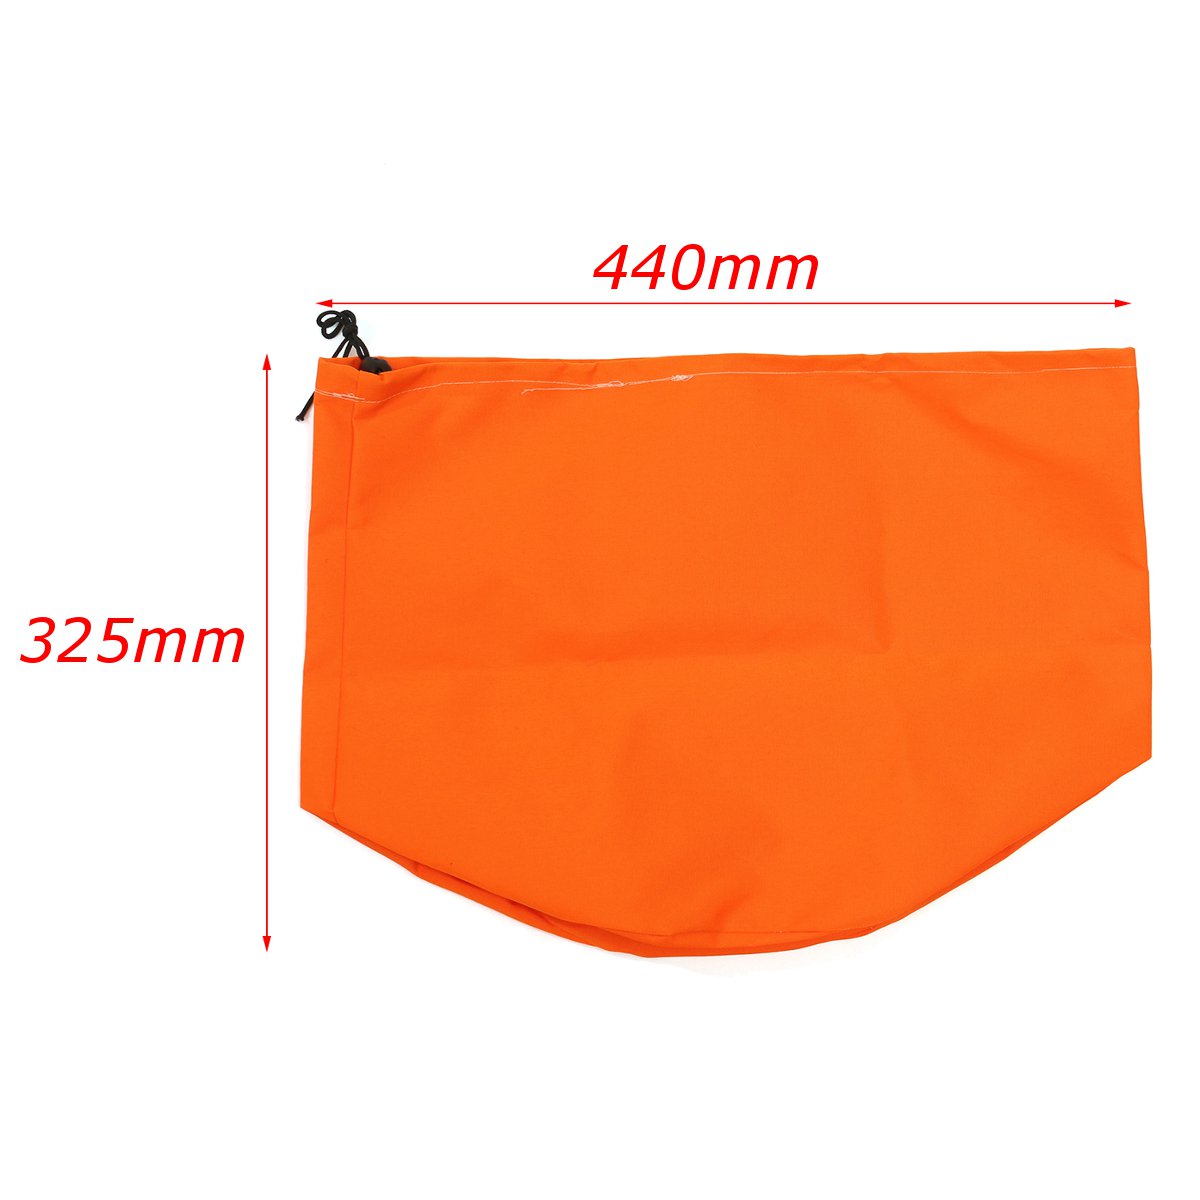 440x325mm-Engine-Cover-Dustproof-Bag-Three-Color-Fits-for-Trimmer-Edger-Pole-saw-1233496-2